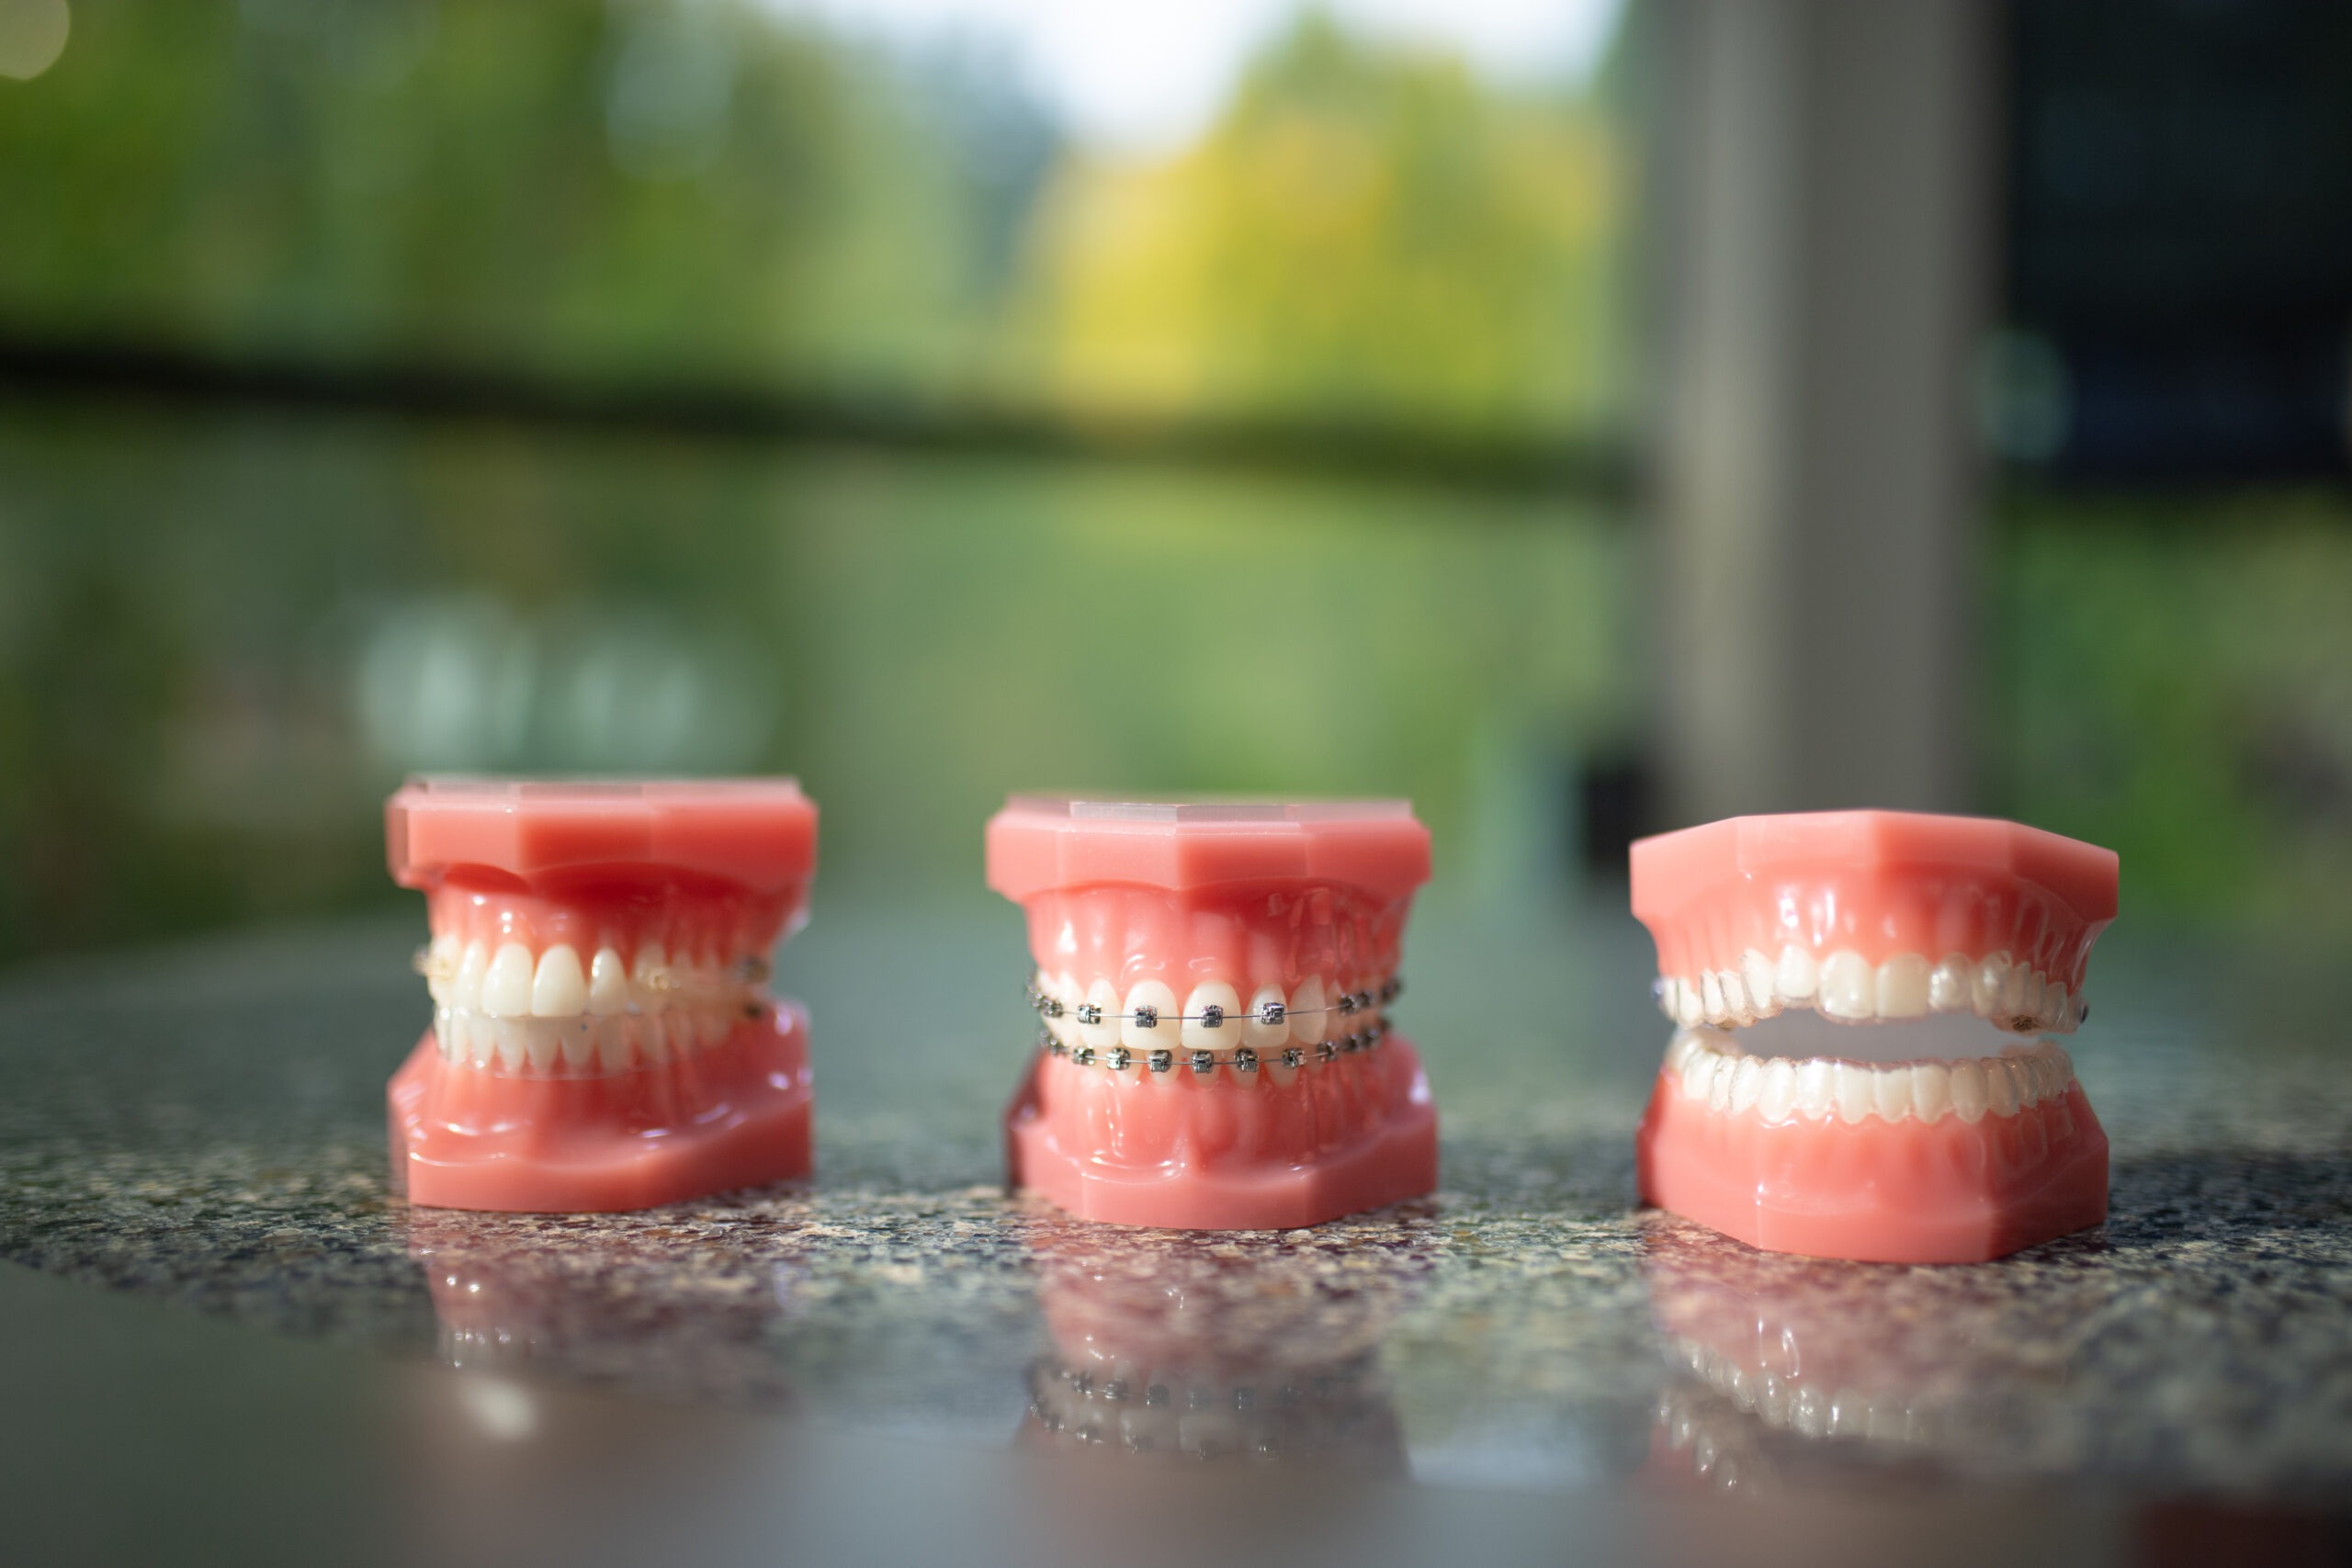 How To Get The Most Out of Your Orthodontic Treatment